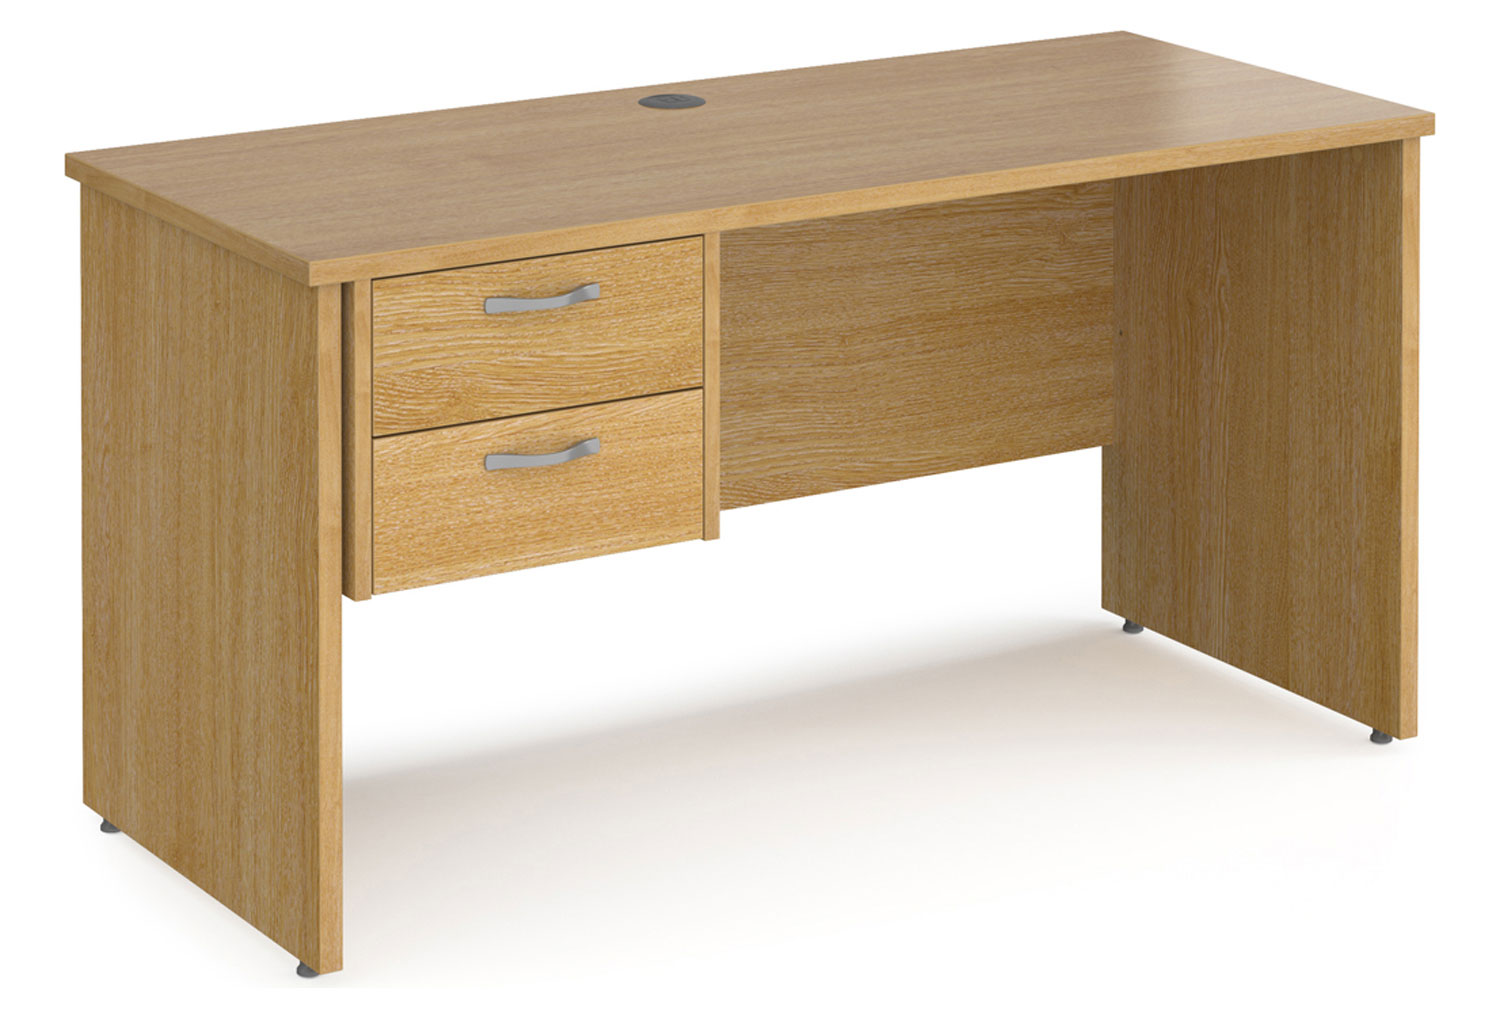 Value Line Deluxe Panel End Narrow Rectangular Office Desk 2 Drawers, 140wx60dx73h (cm), Oak, Express Delivery